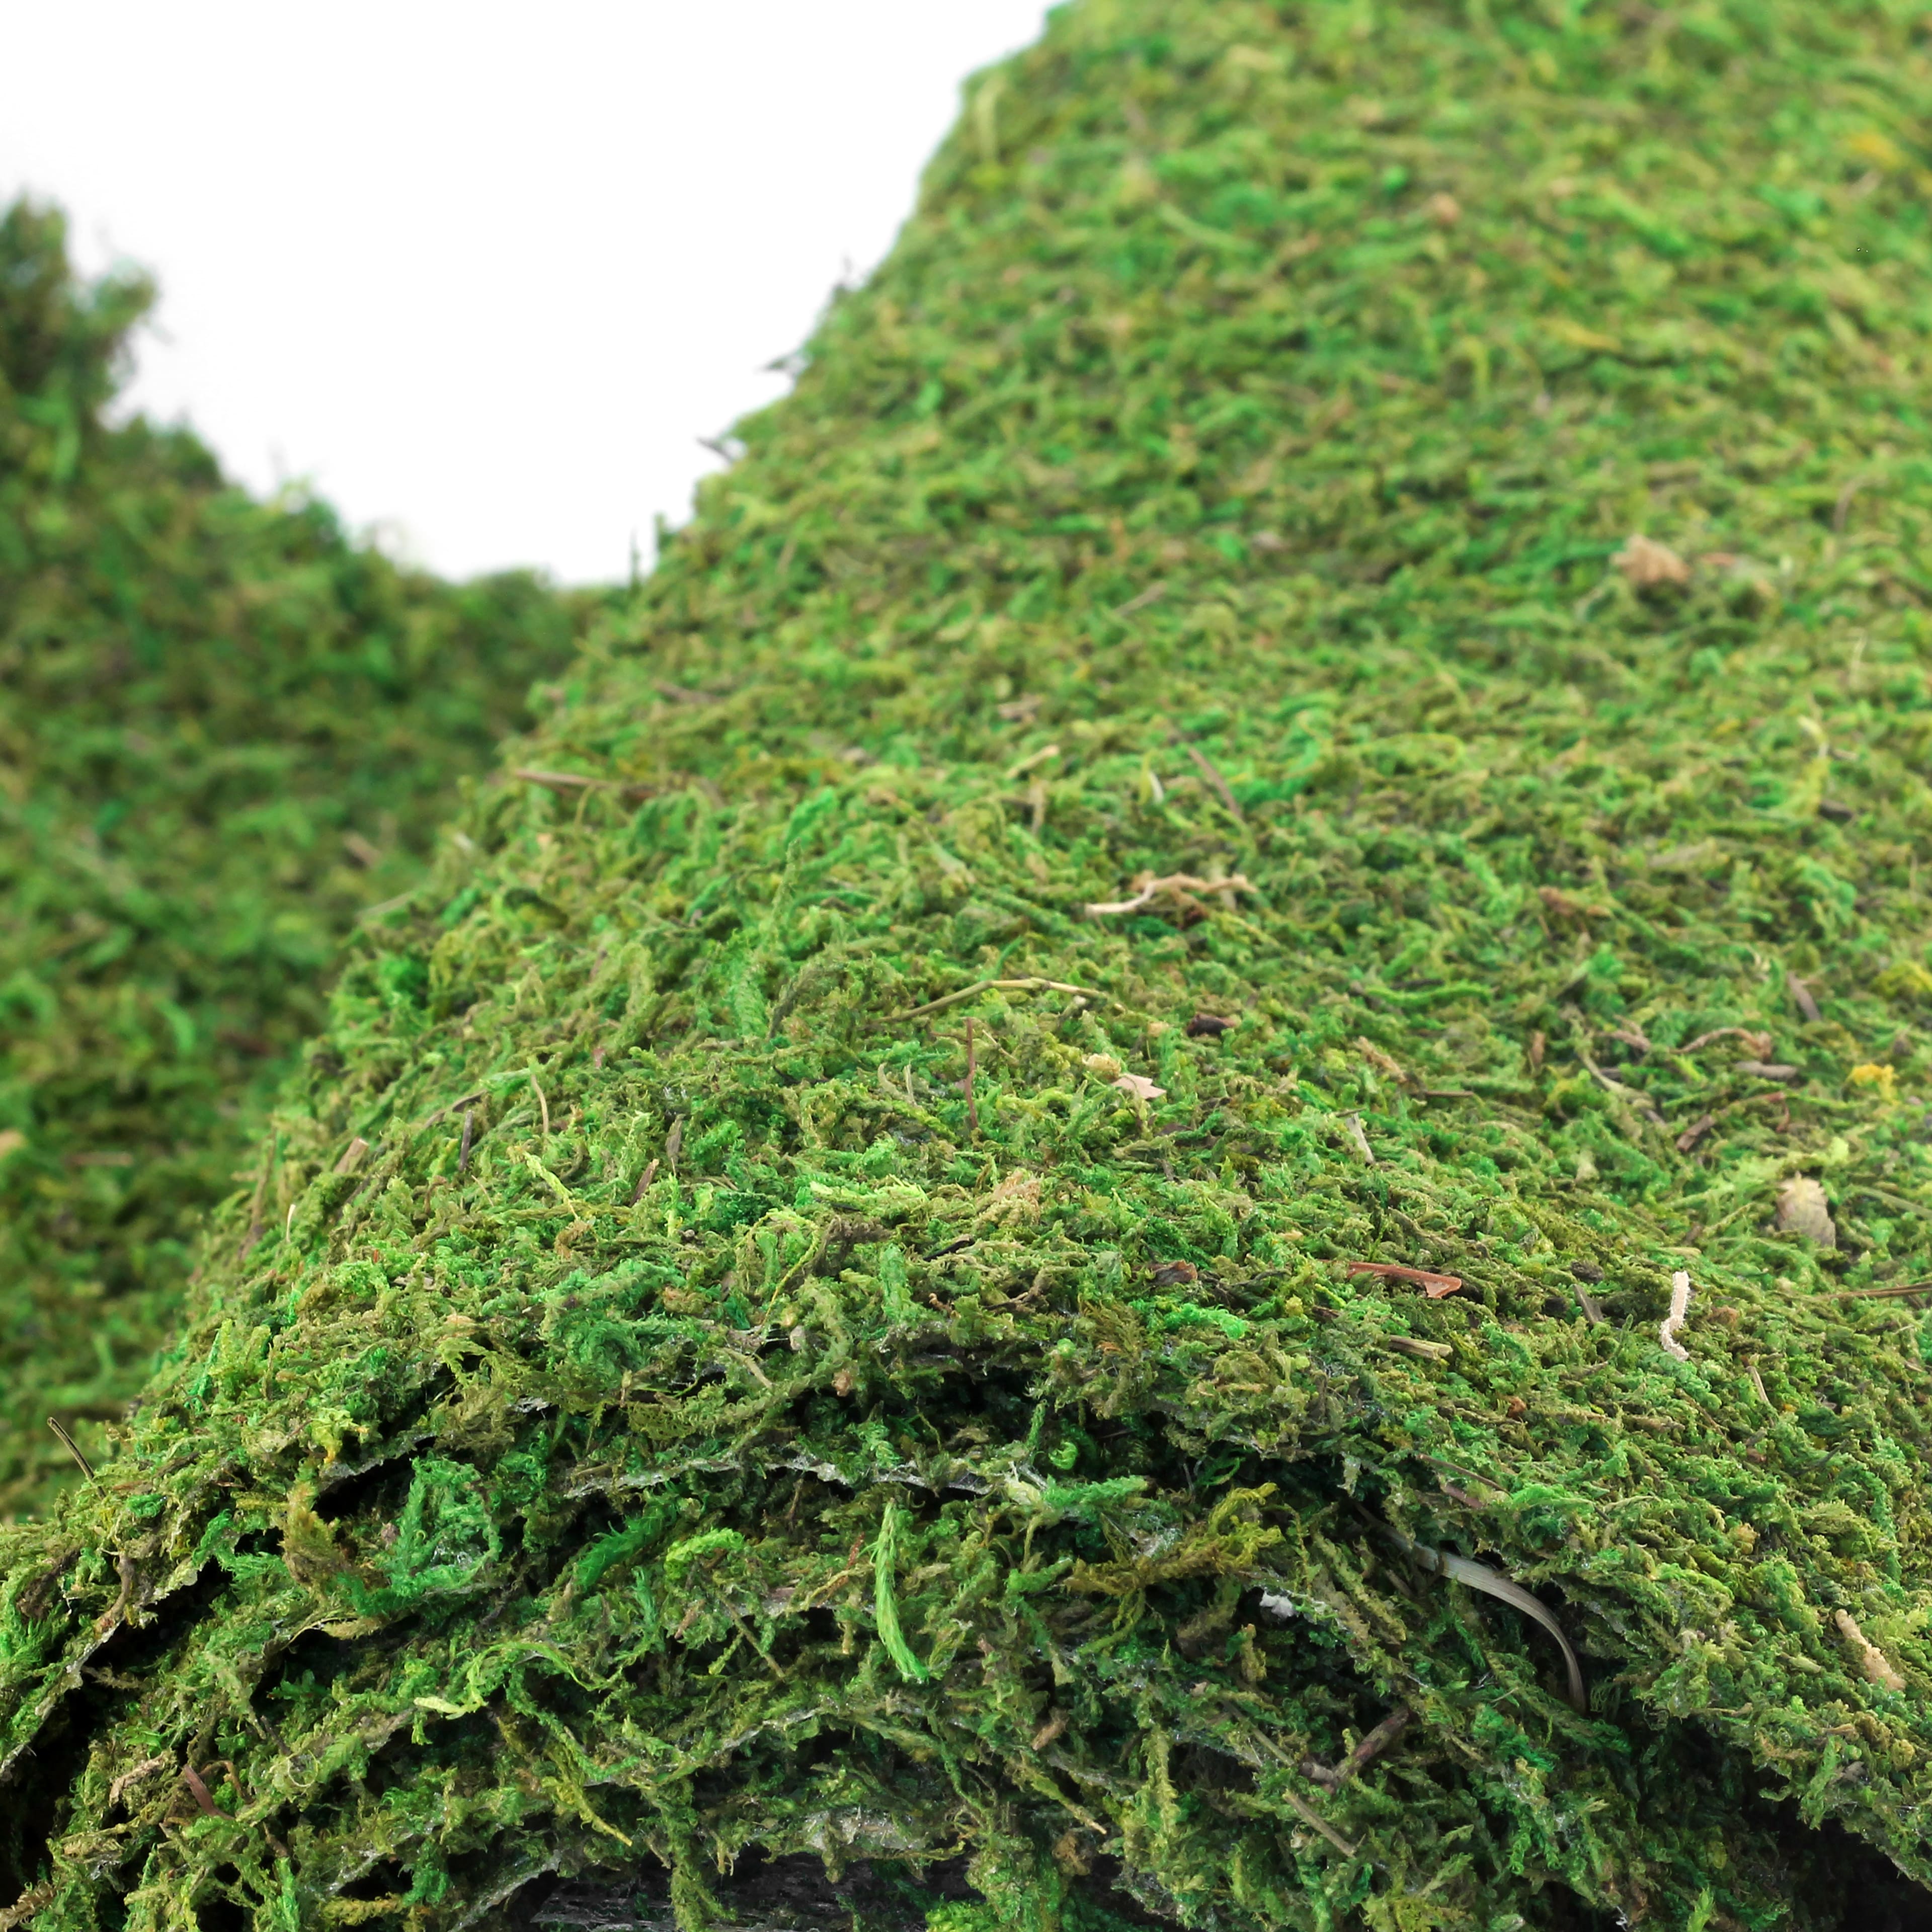 Crafters Choice Artificial Moss In Bag Green